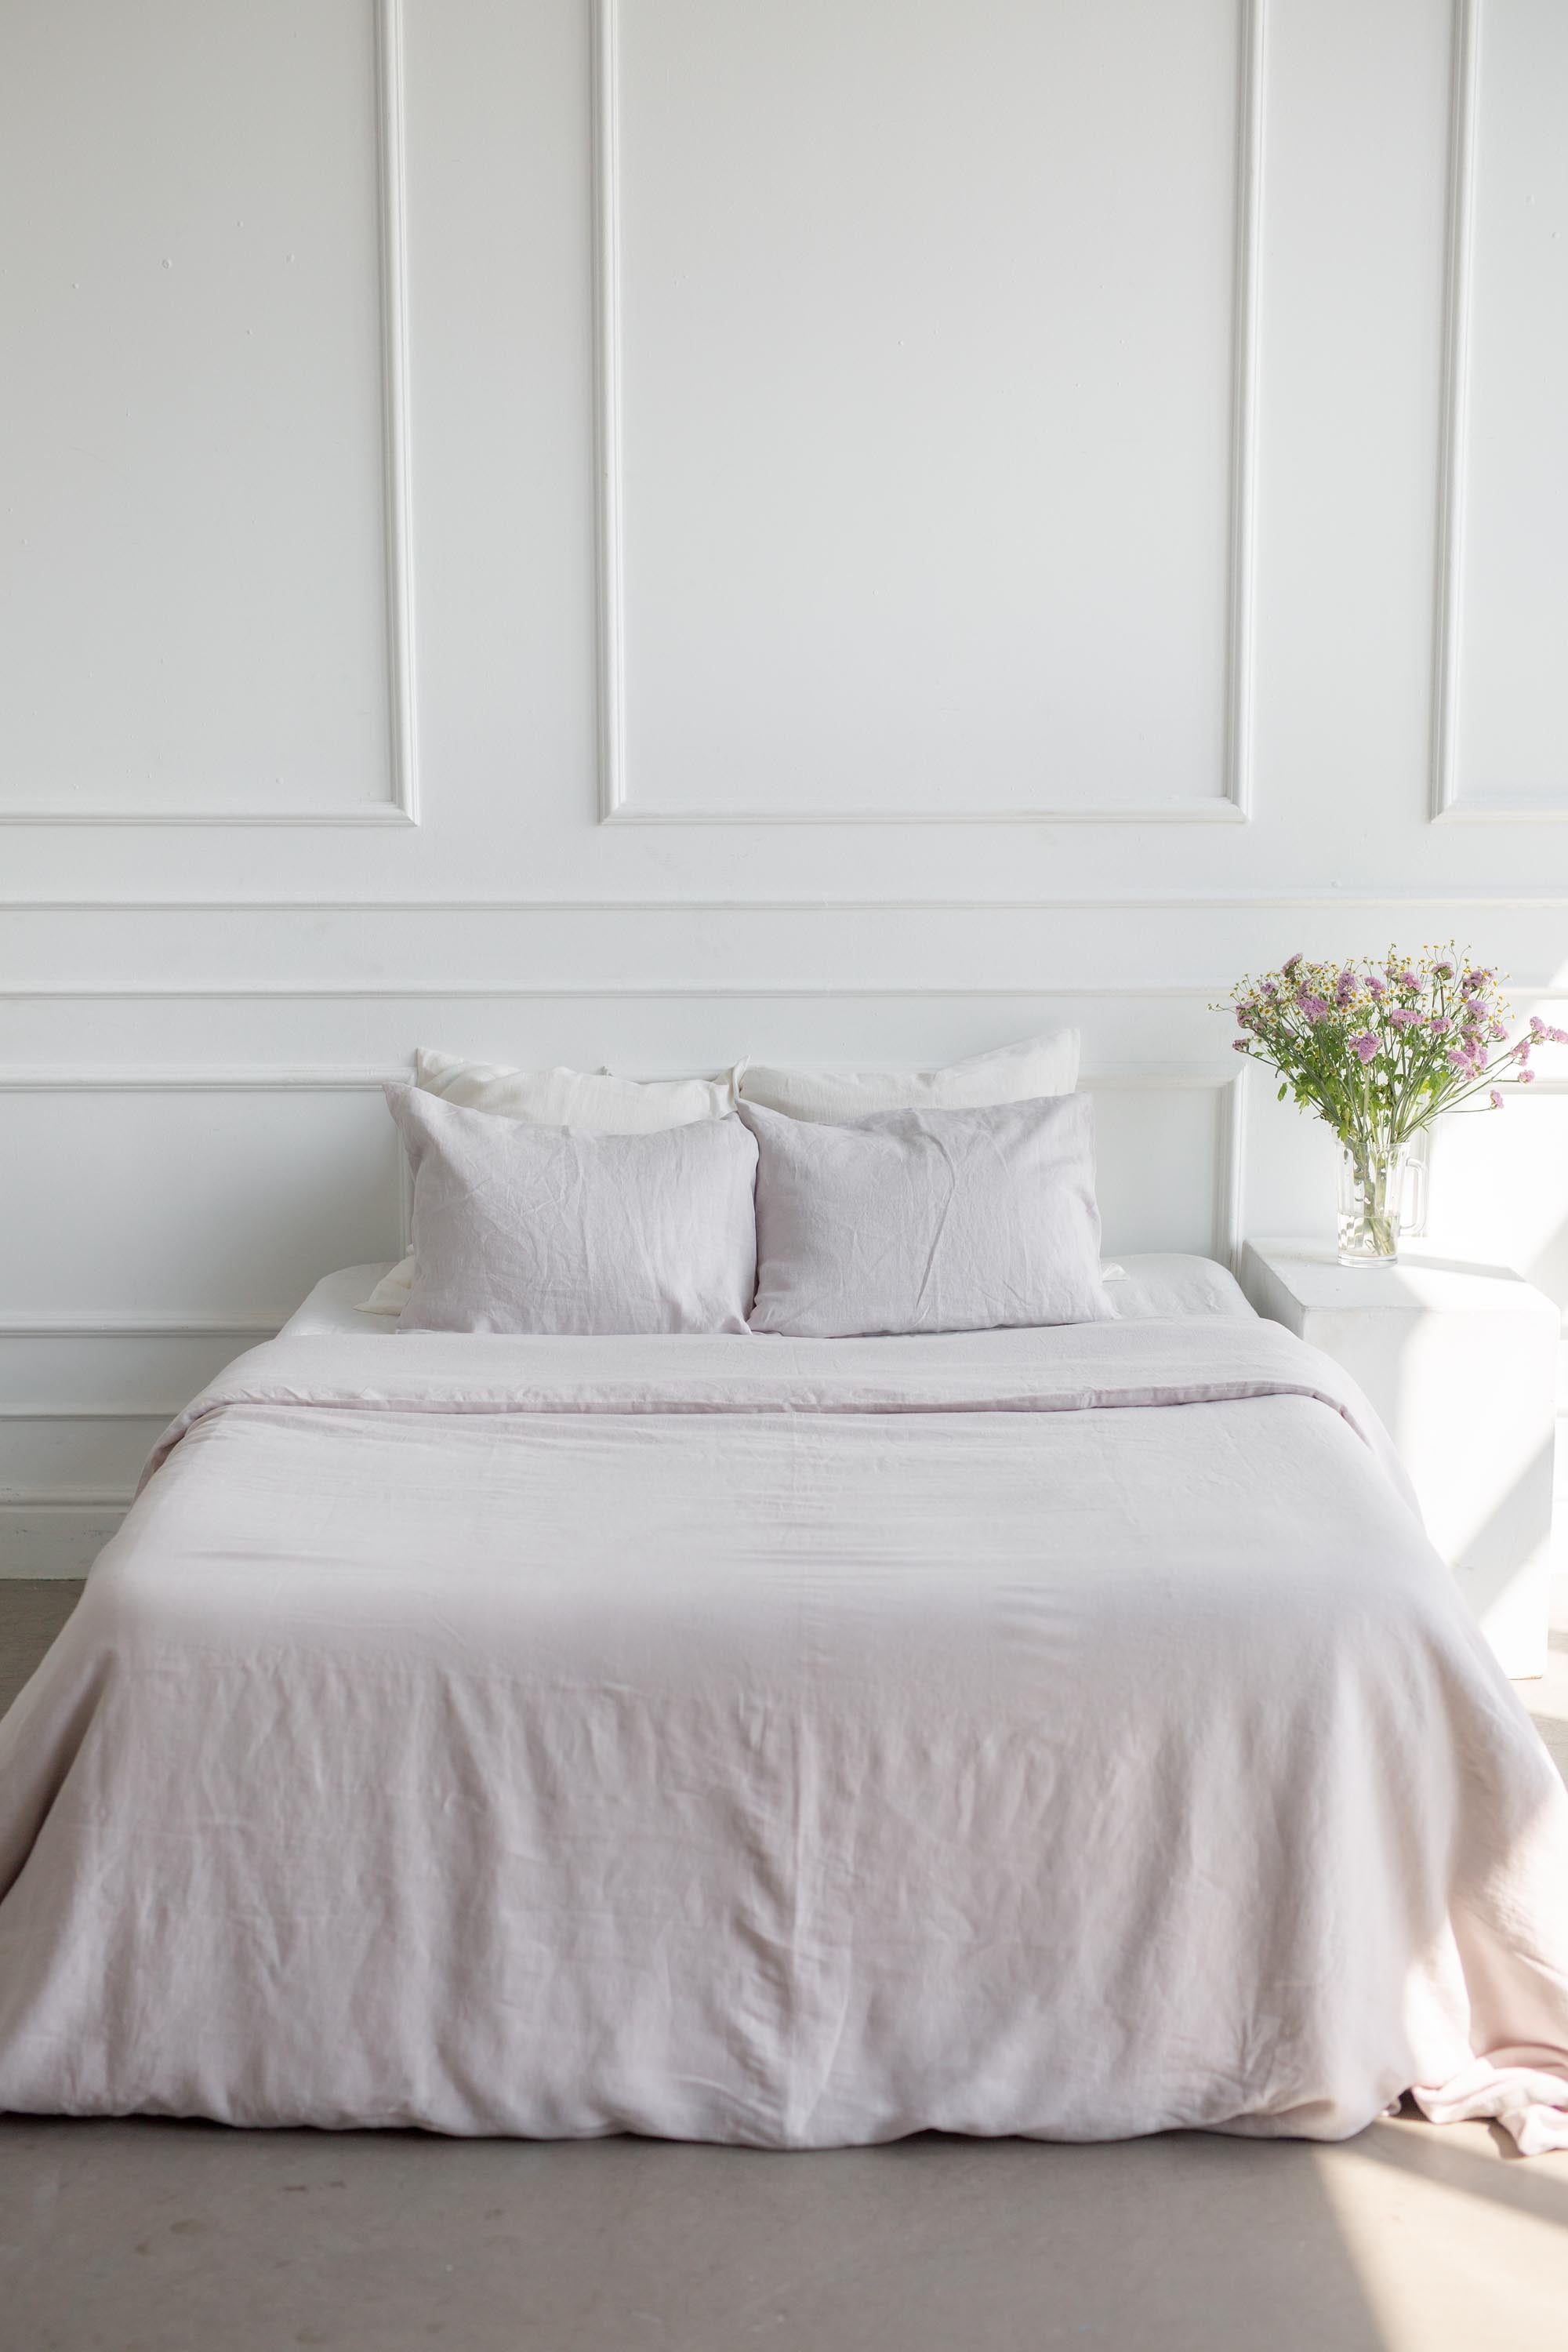 Bed With Cream Linen Duvet Cover By AmourlInen